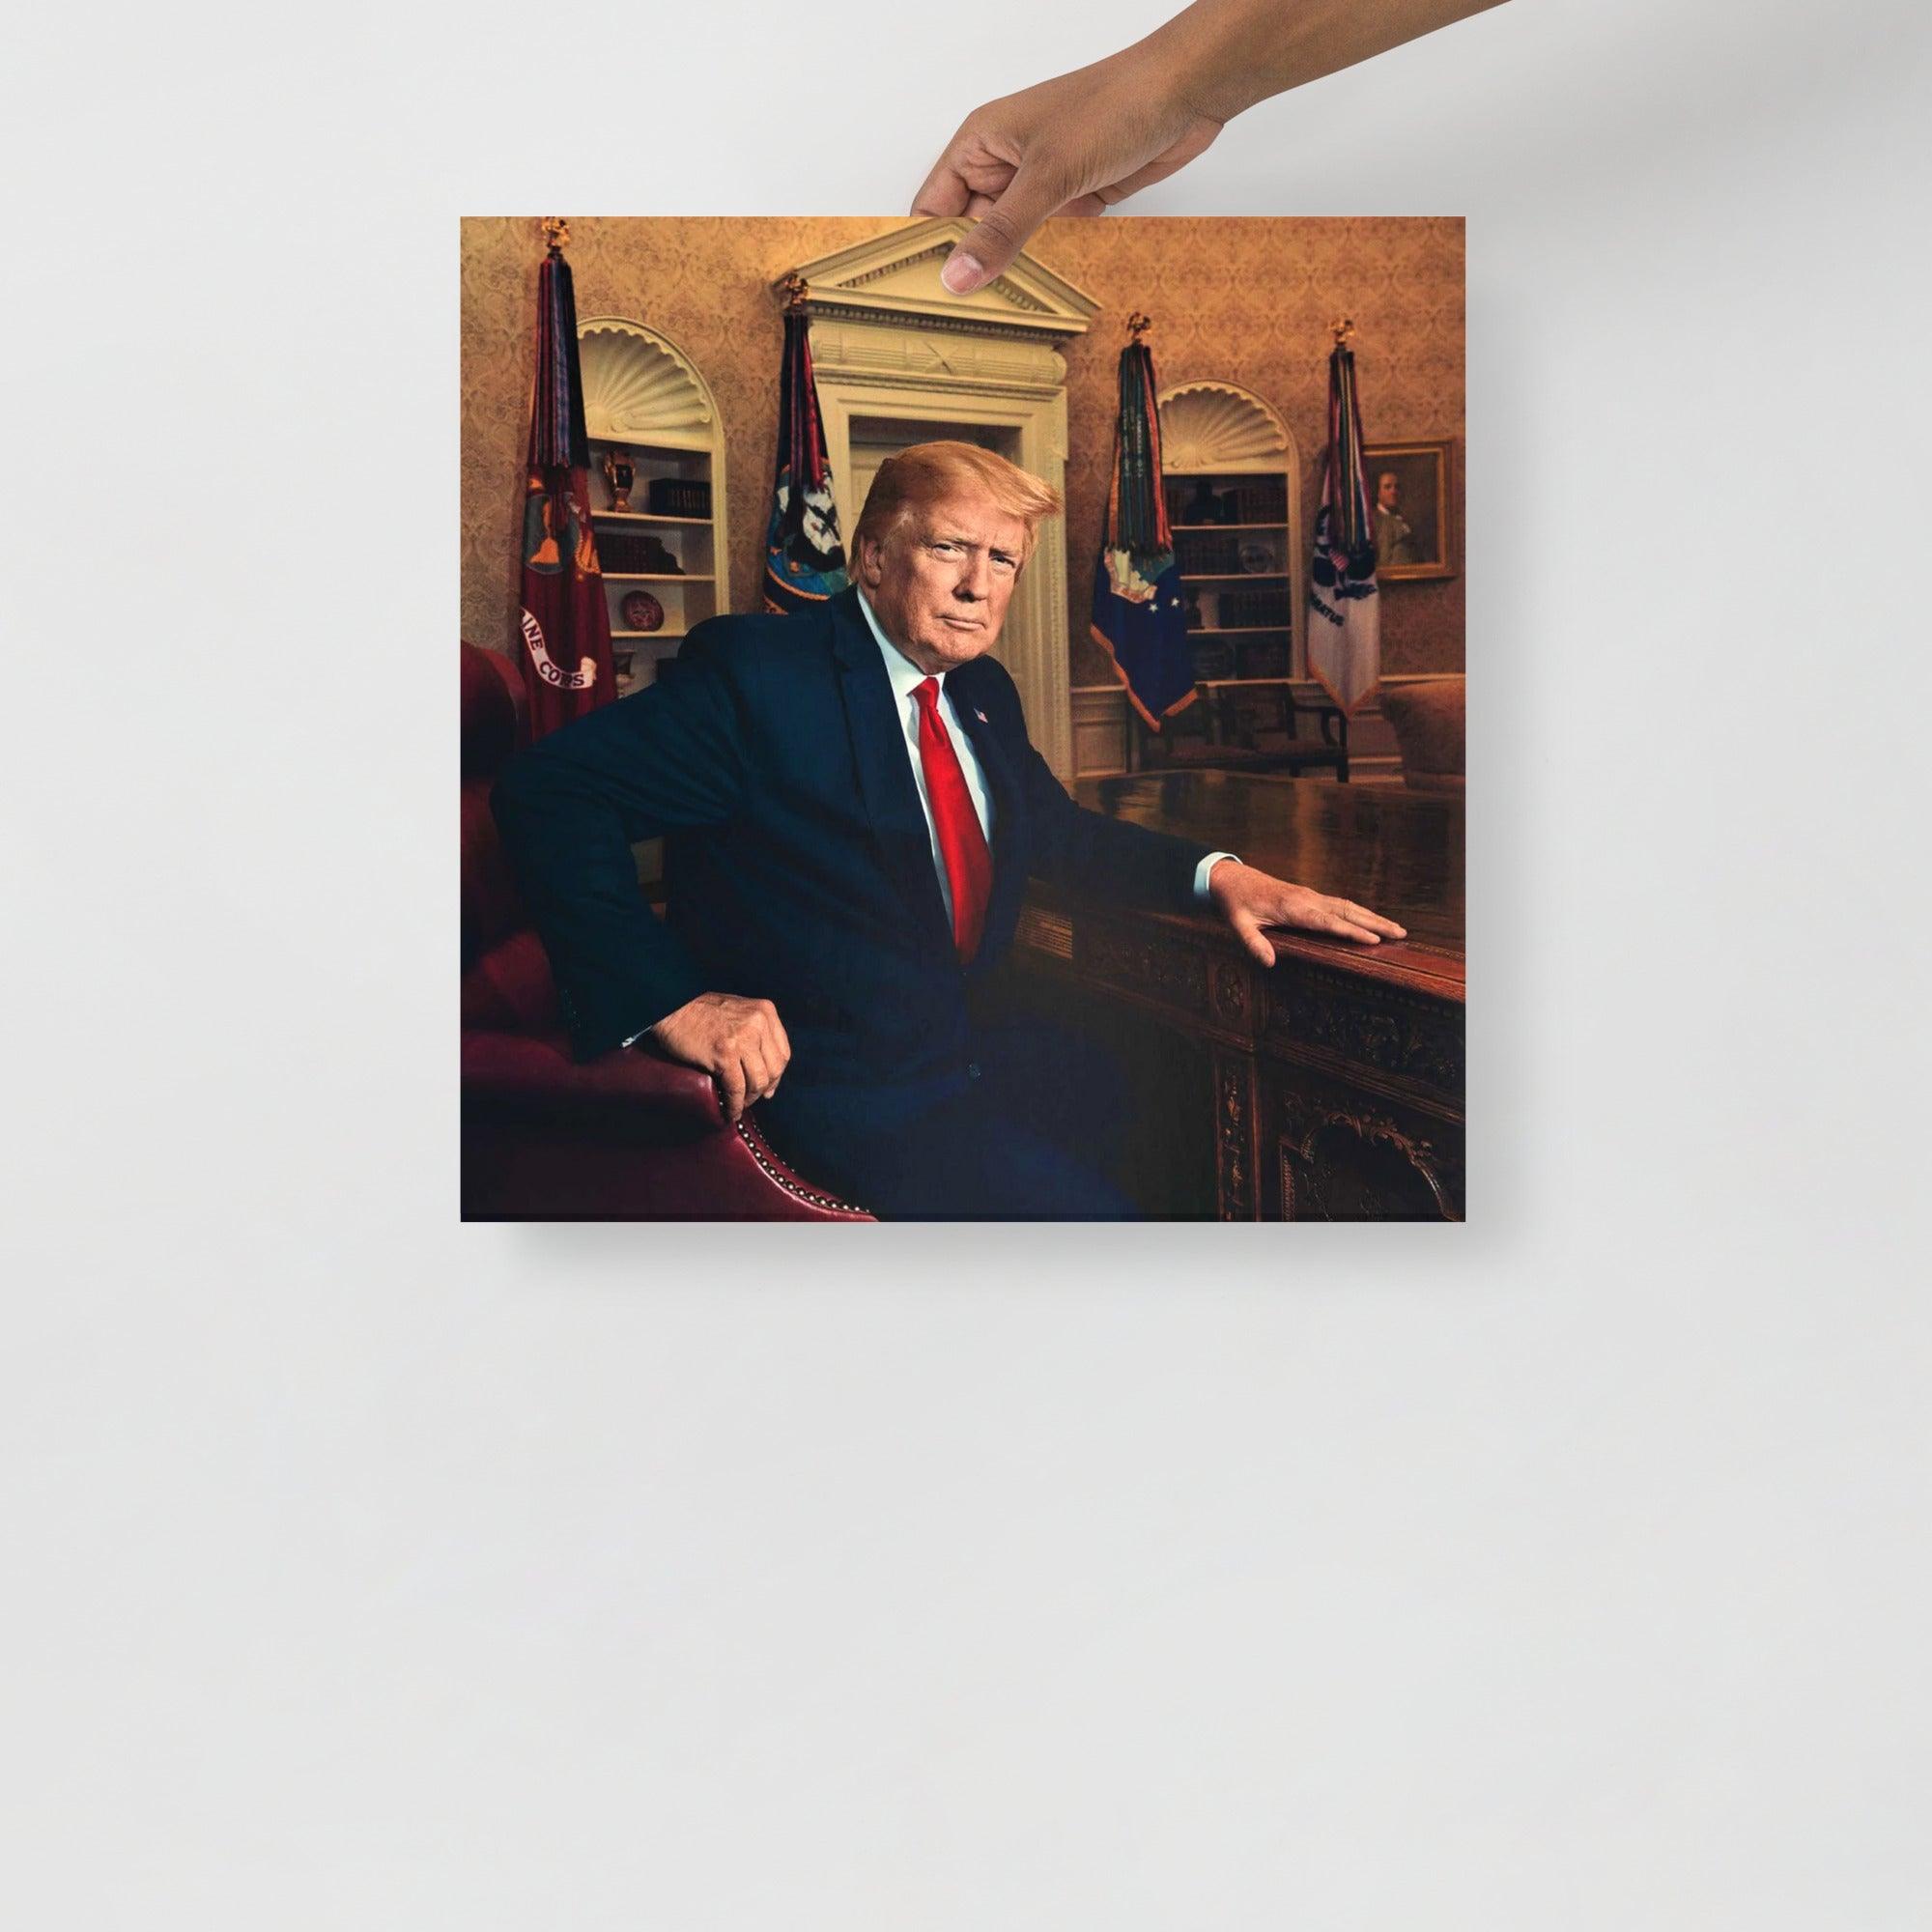 A Donald Trump at the Oval Office poster on a plain backdrop in size 18x18”.